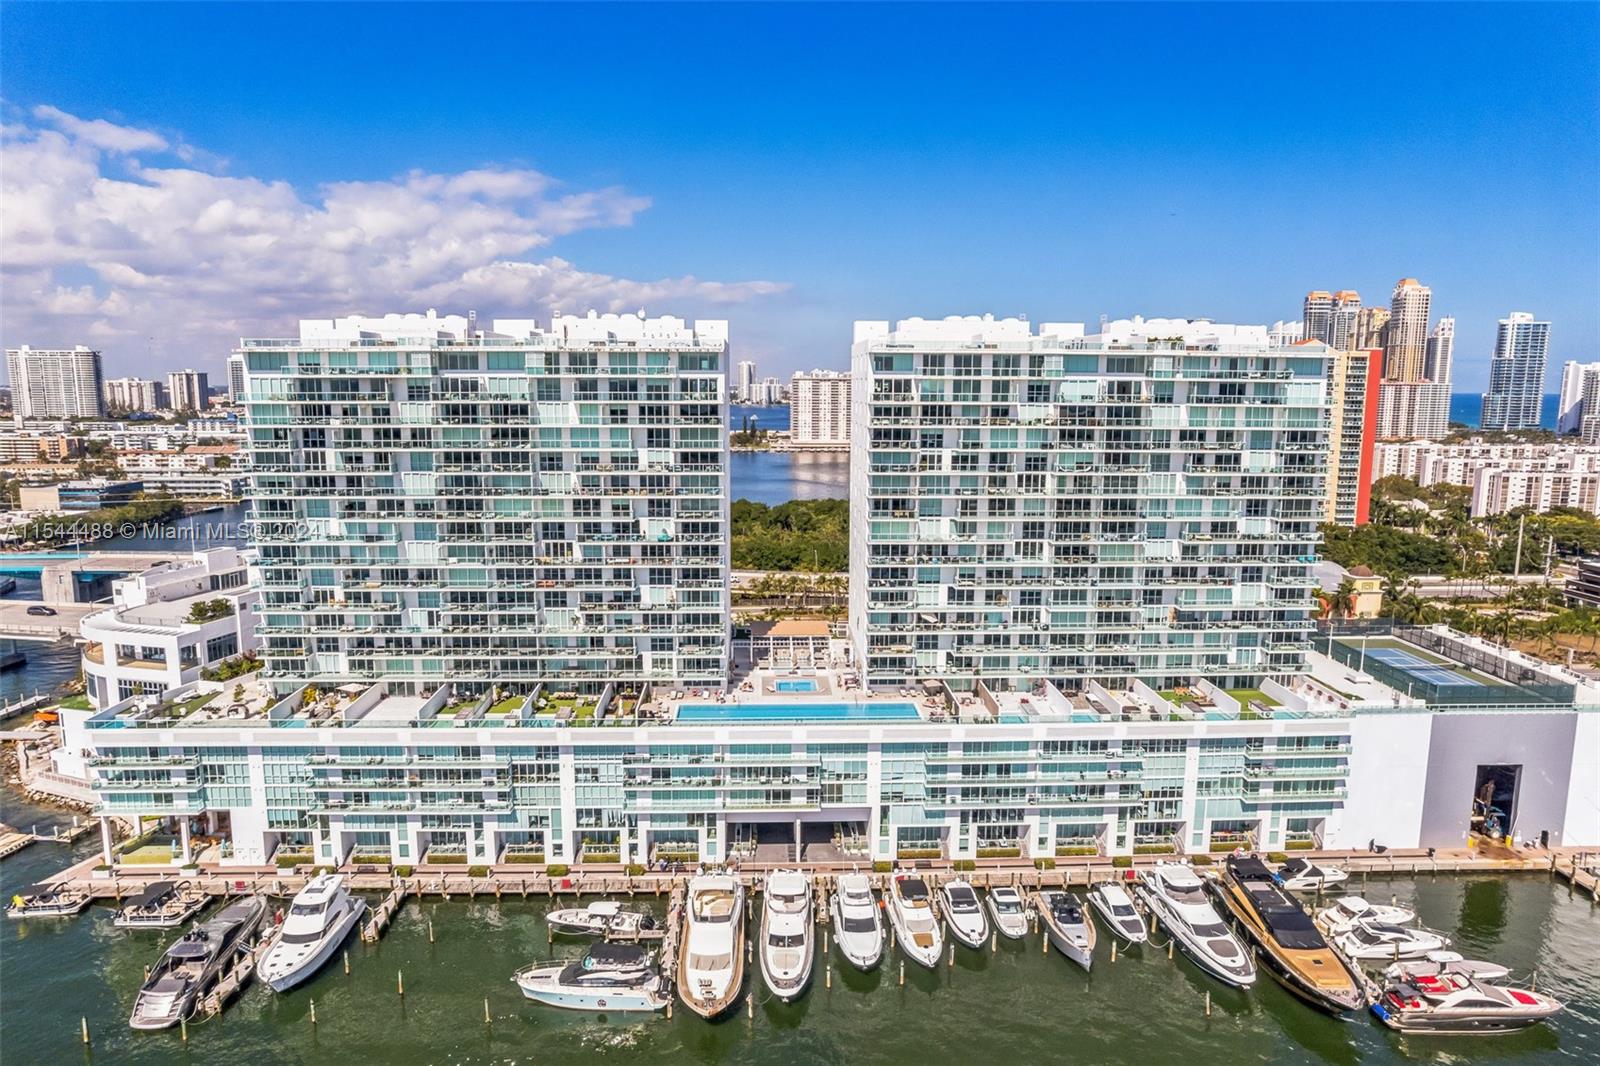 Experience waterfront luxury living at its finest in this exquisite 2 Bed + Den | 3 Bath two-story unit located in the prestigious 400 Sunny Isles community. Boasting breathtaking views of the Intracoastal Waterway and city skyline from floor-to-ceiling windows, this residence offers a seamless blend of modern elegance and comfort. Enjoy resort-style amenities including an infinity-edge pool and private marina. Perfectly situated near beaches, dining, and shopping, this is the epitome of Miami waterfront living. Schedule your tour today!